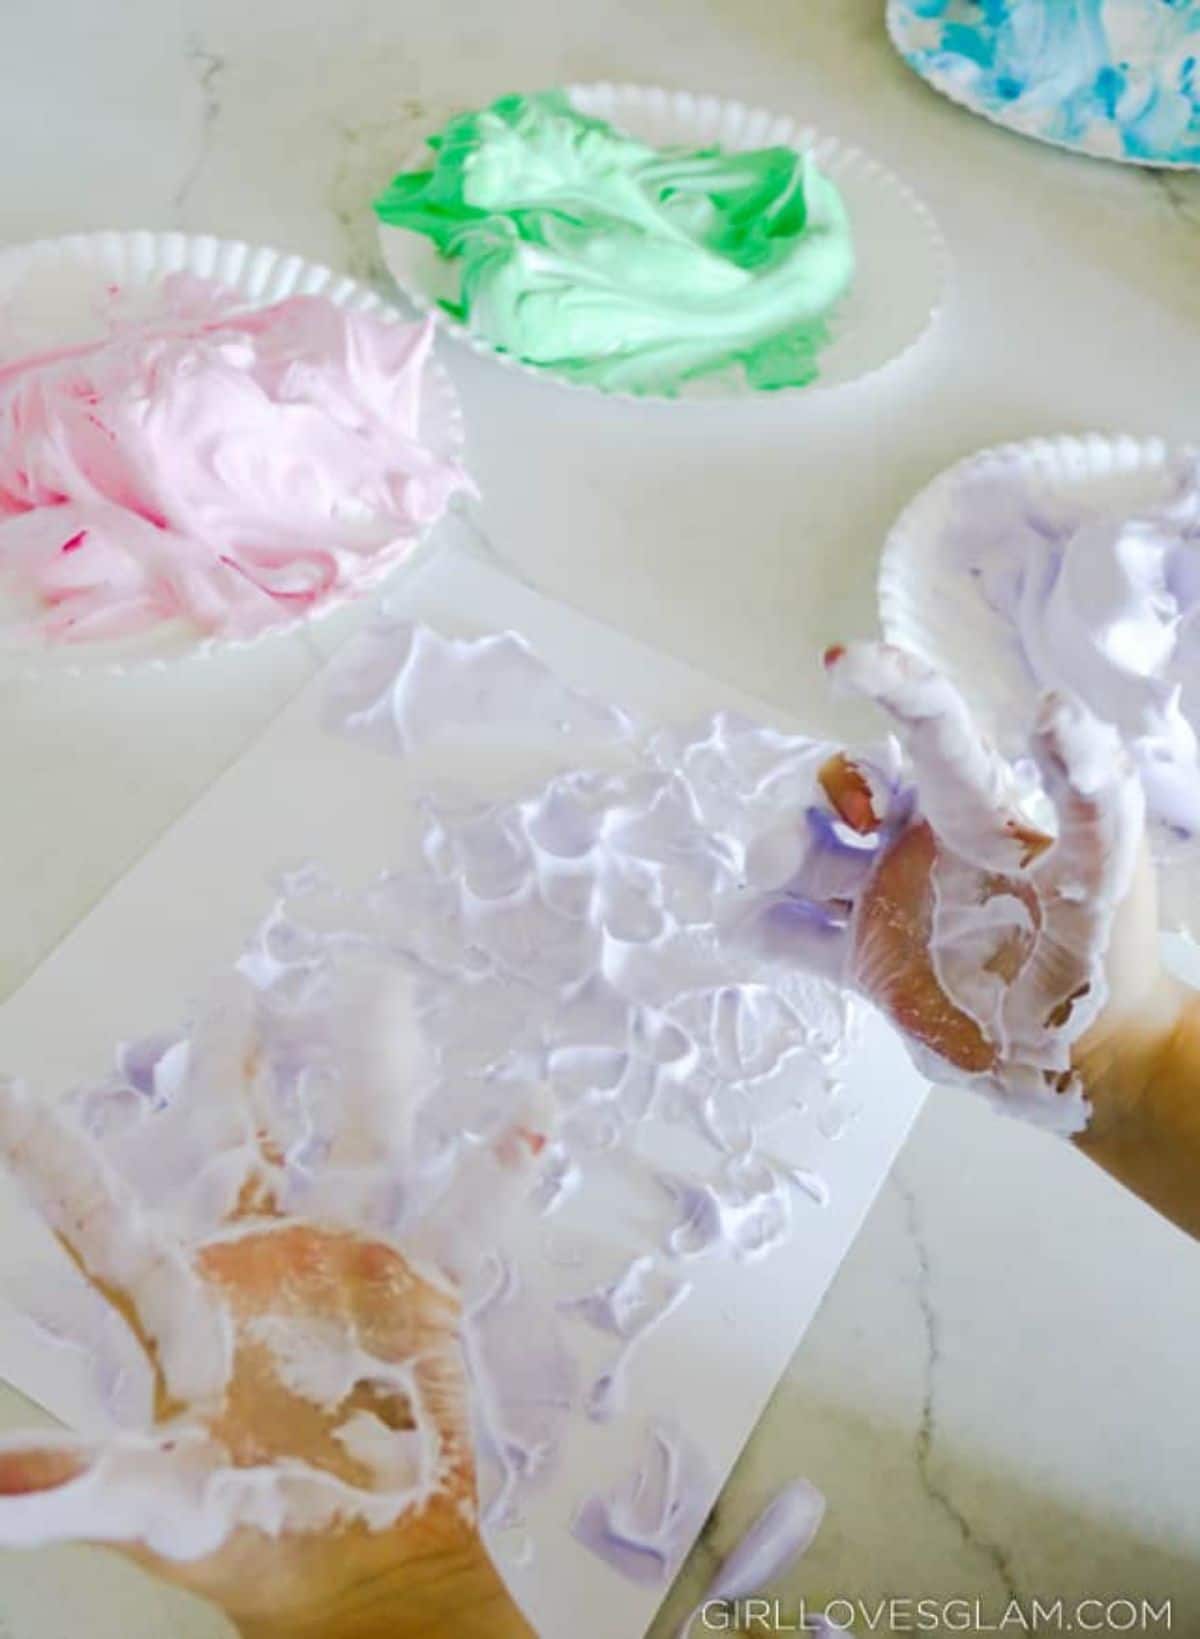 two hands are covered in foam. A sheet of paper is also covered in colored foam. 4 paper plates hold different colored foam